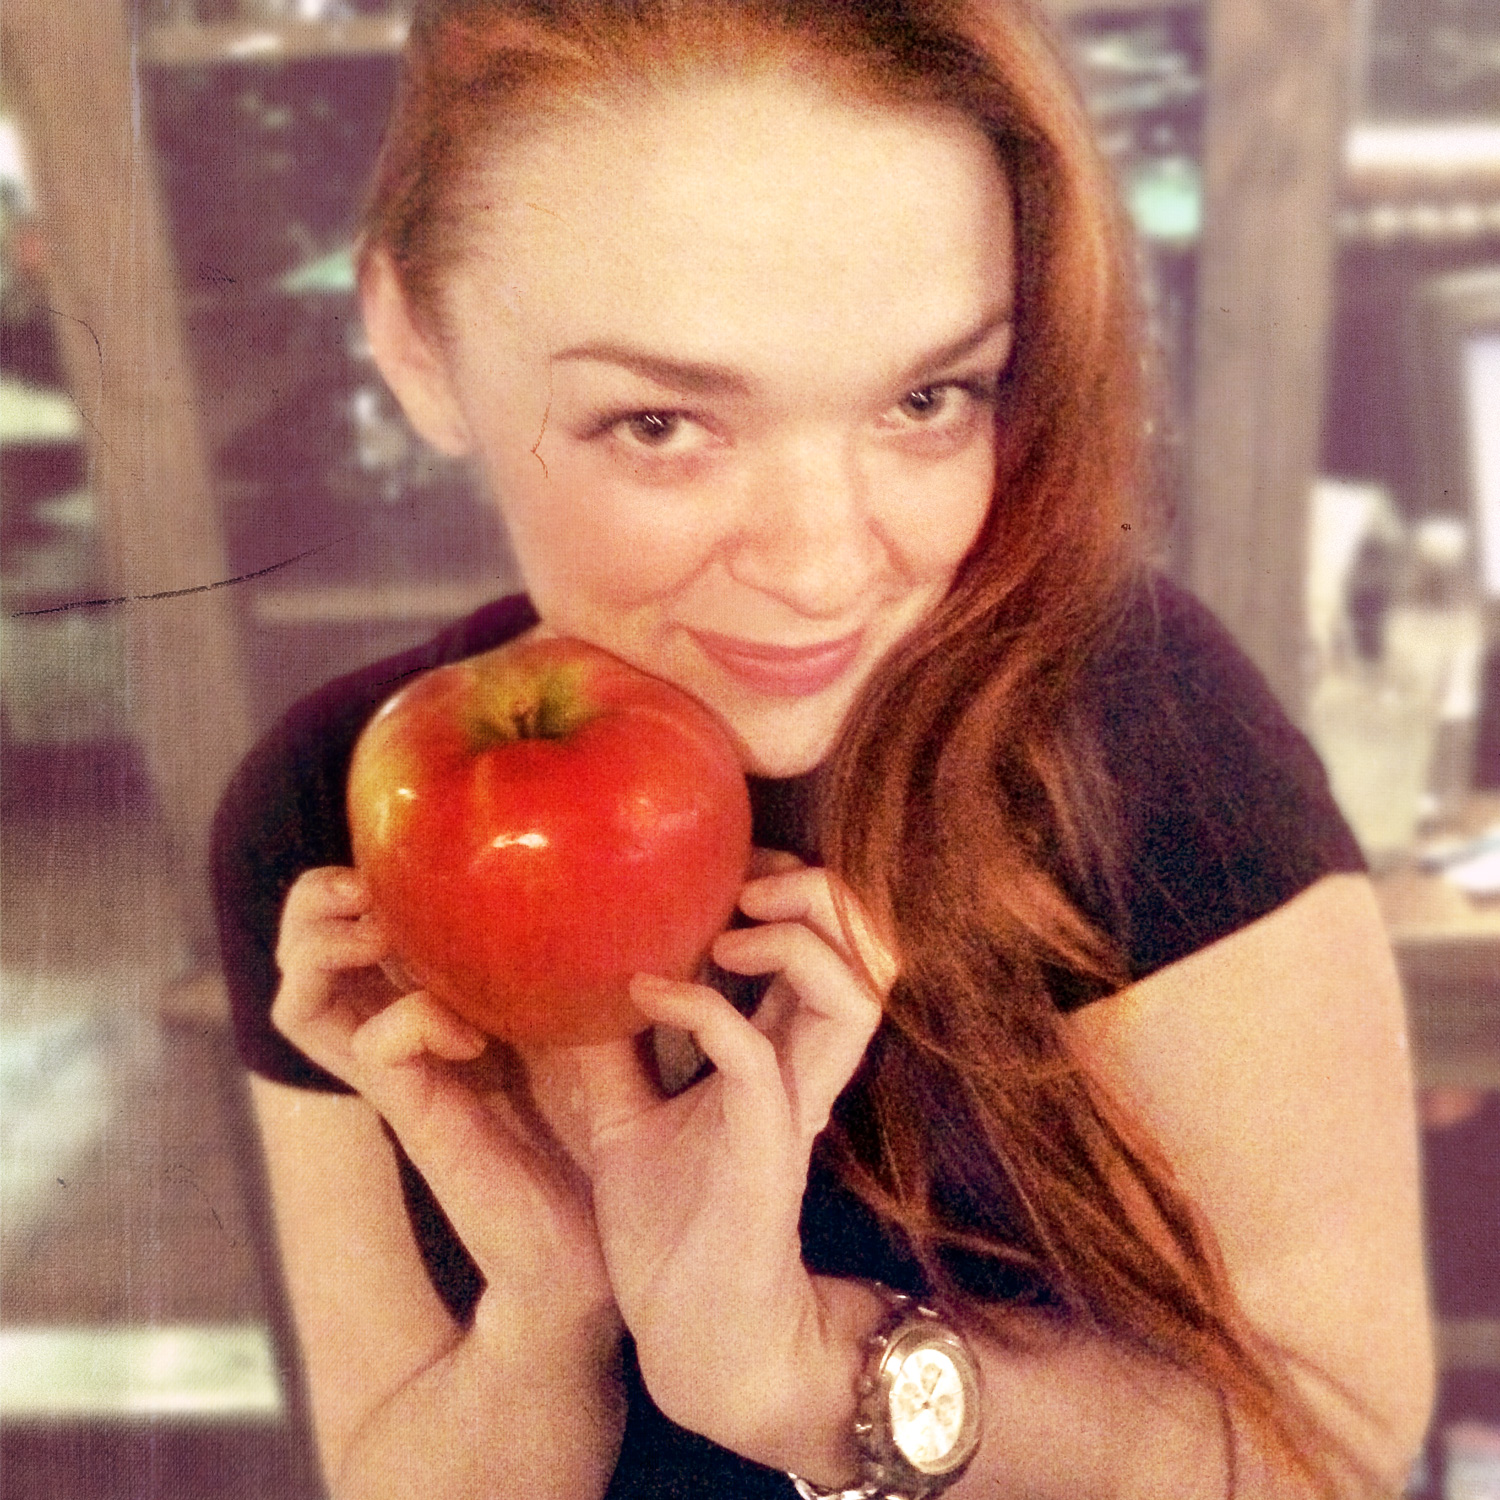 Katie Vincent and the Red Apple